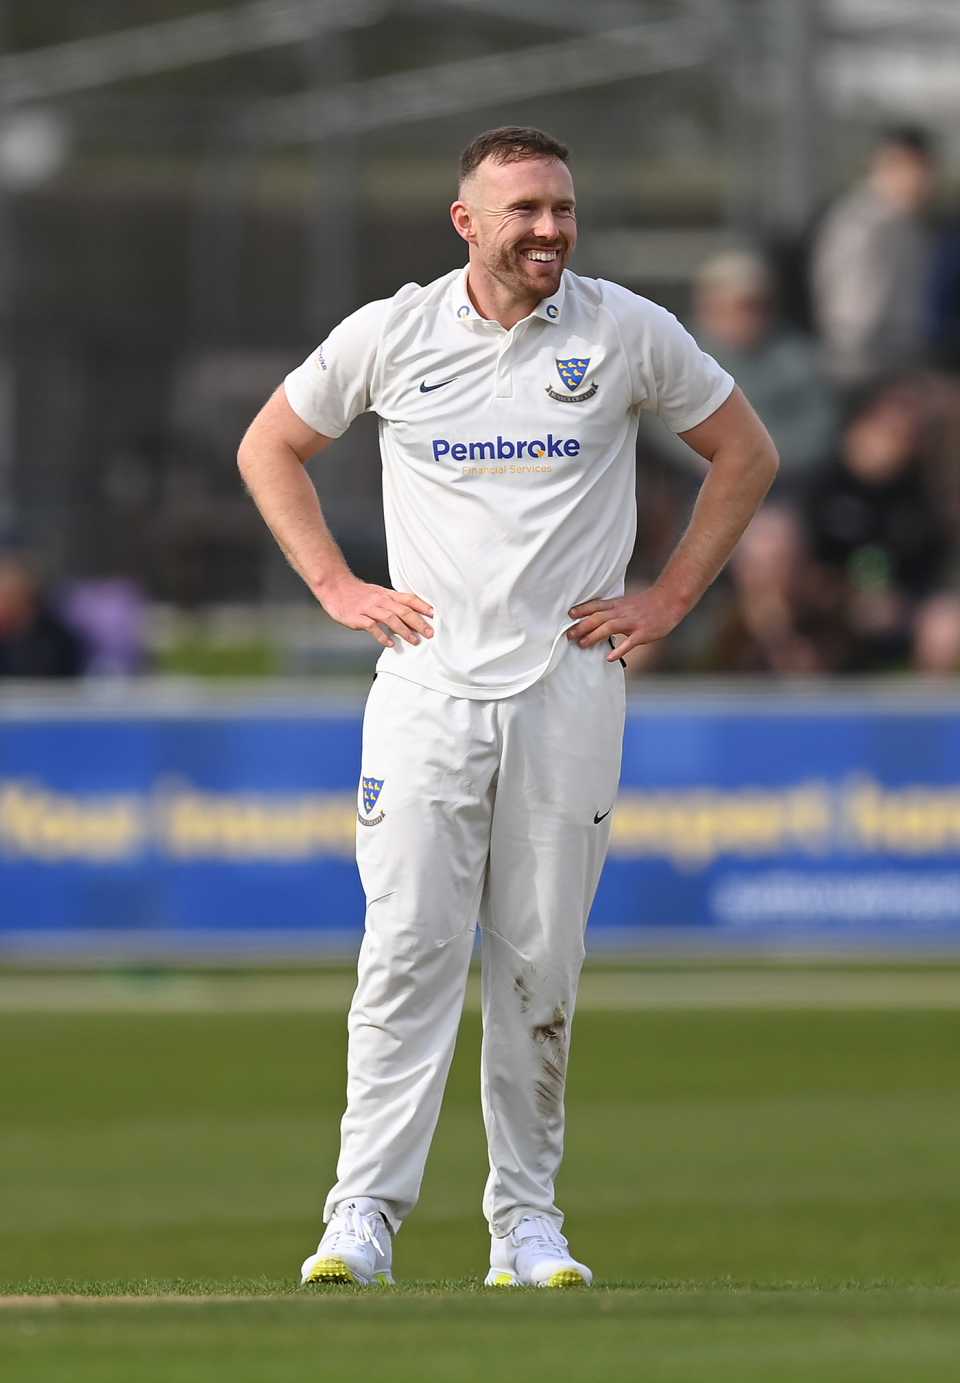 Danny Lamb was making his Sussex debut